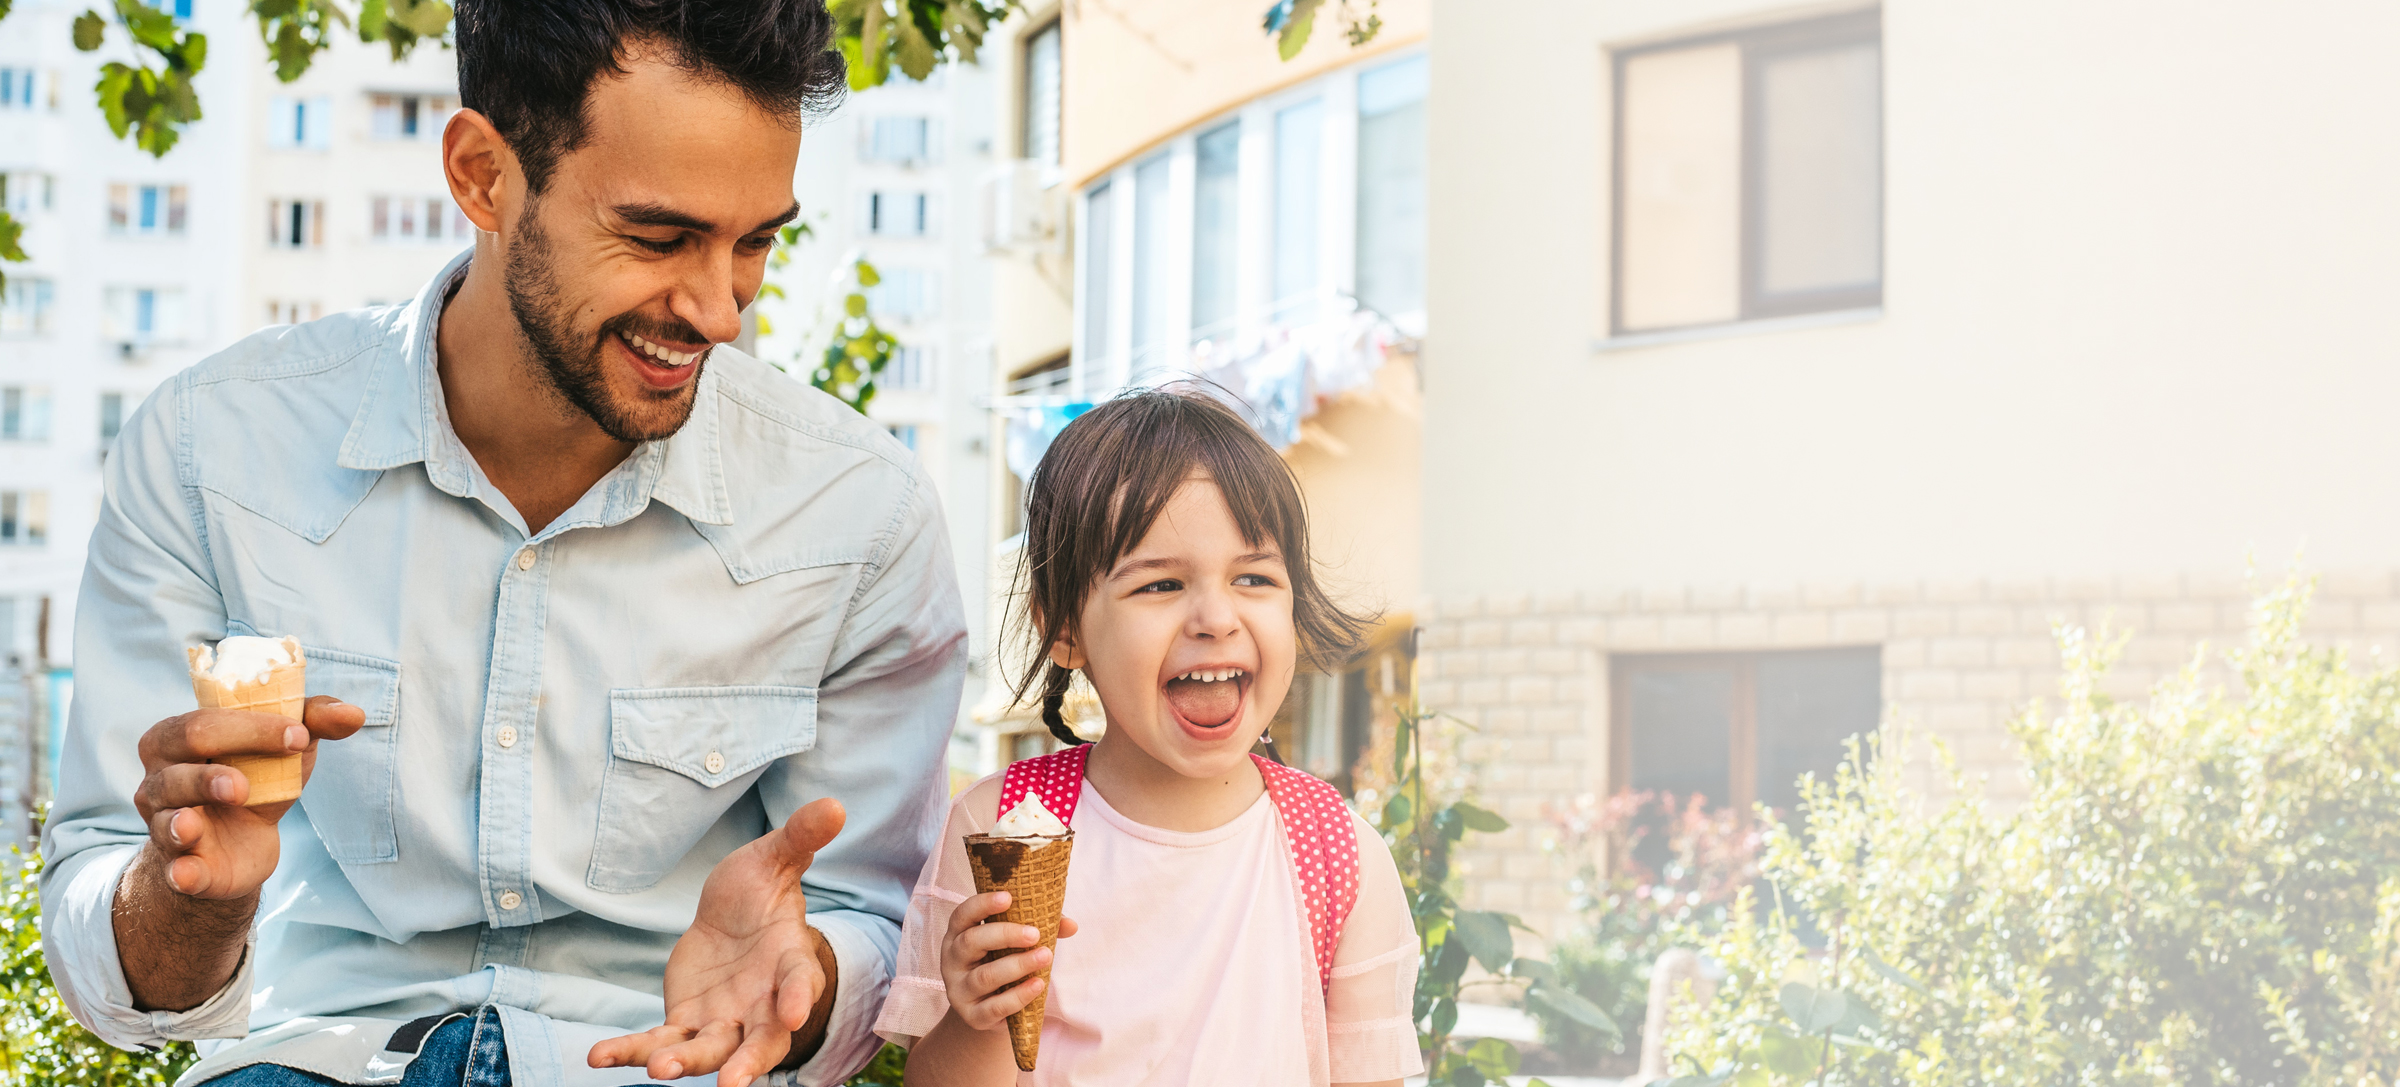 father and daughter enjoy ice cream outside